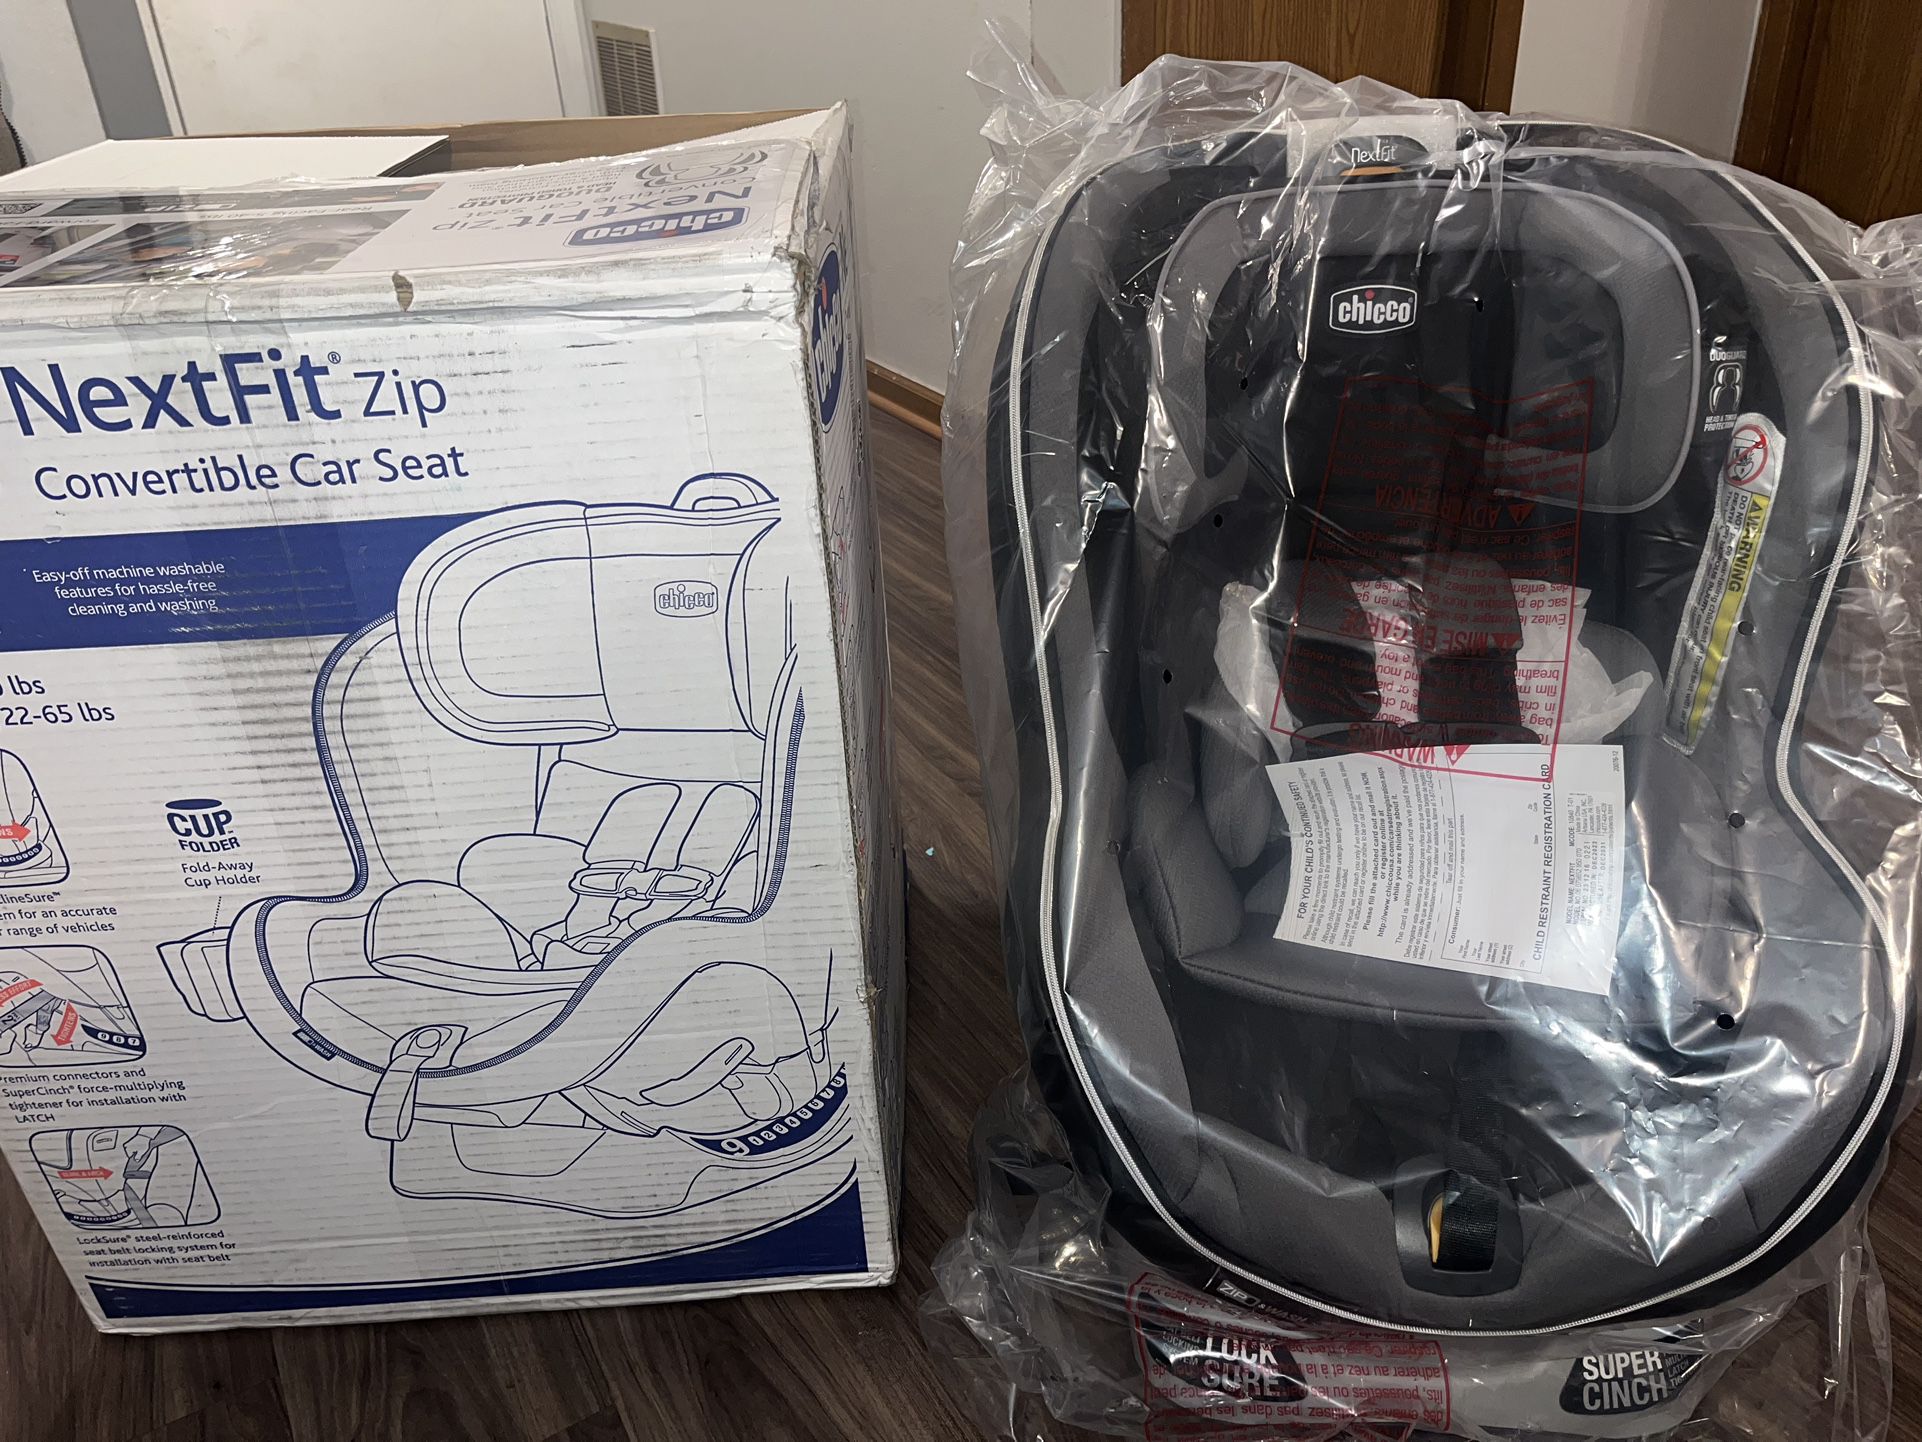 NEW Chicco NextFit Zip Convertible Car Seat